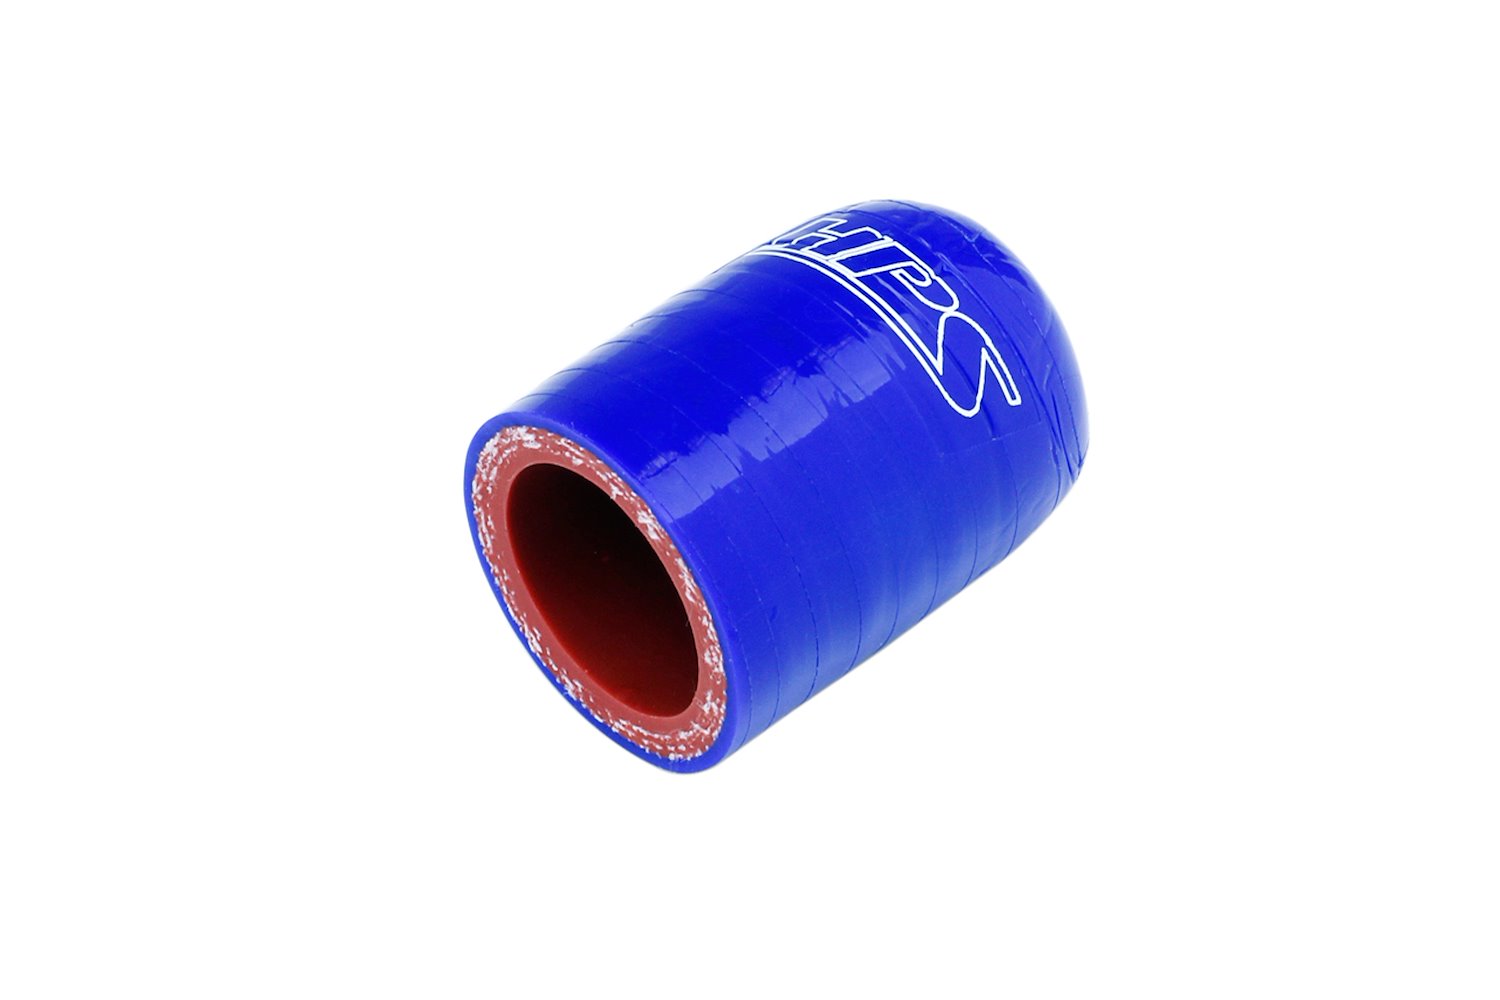 RSCC-118-BLUE Coolant Bypass Cap, 3-Ply Reinforced High-Temp. Silicone Bypass Cap, 1-3/16 in. ID, Blue